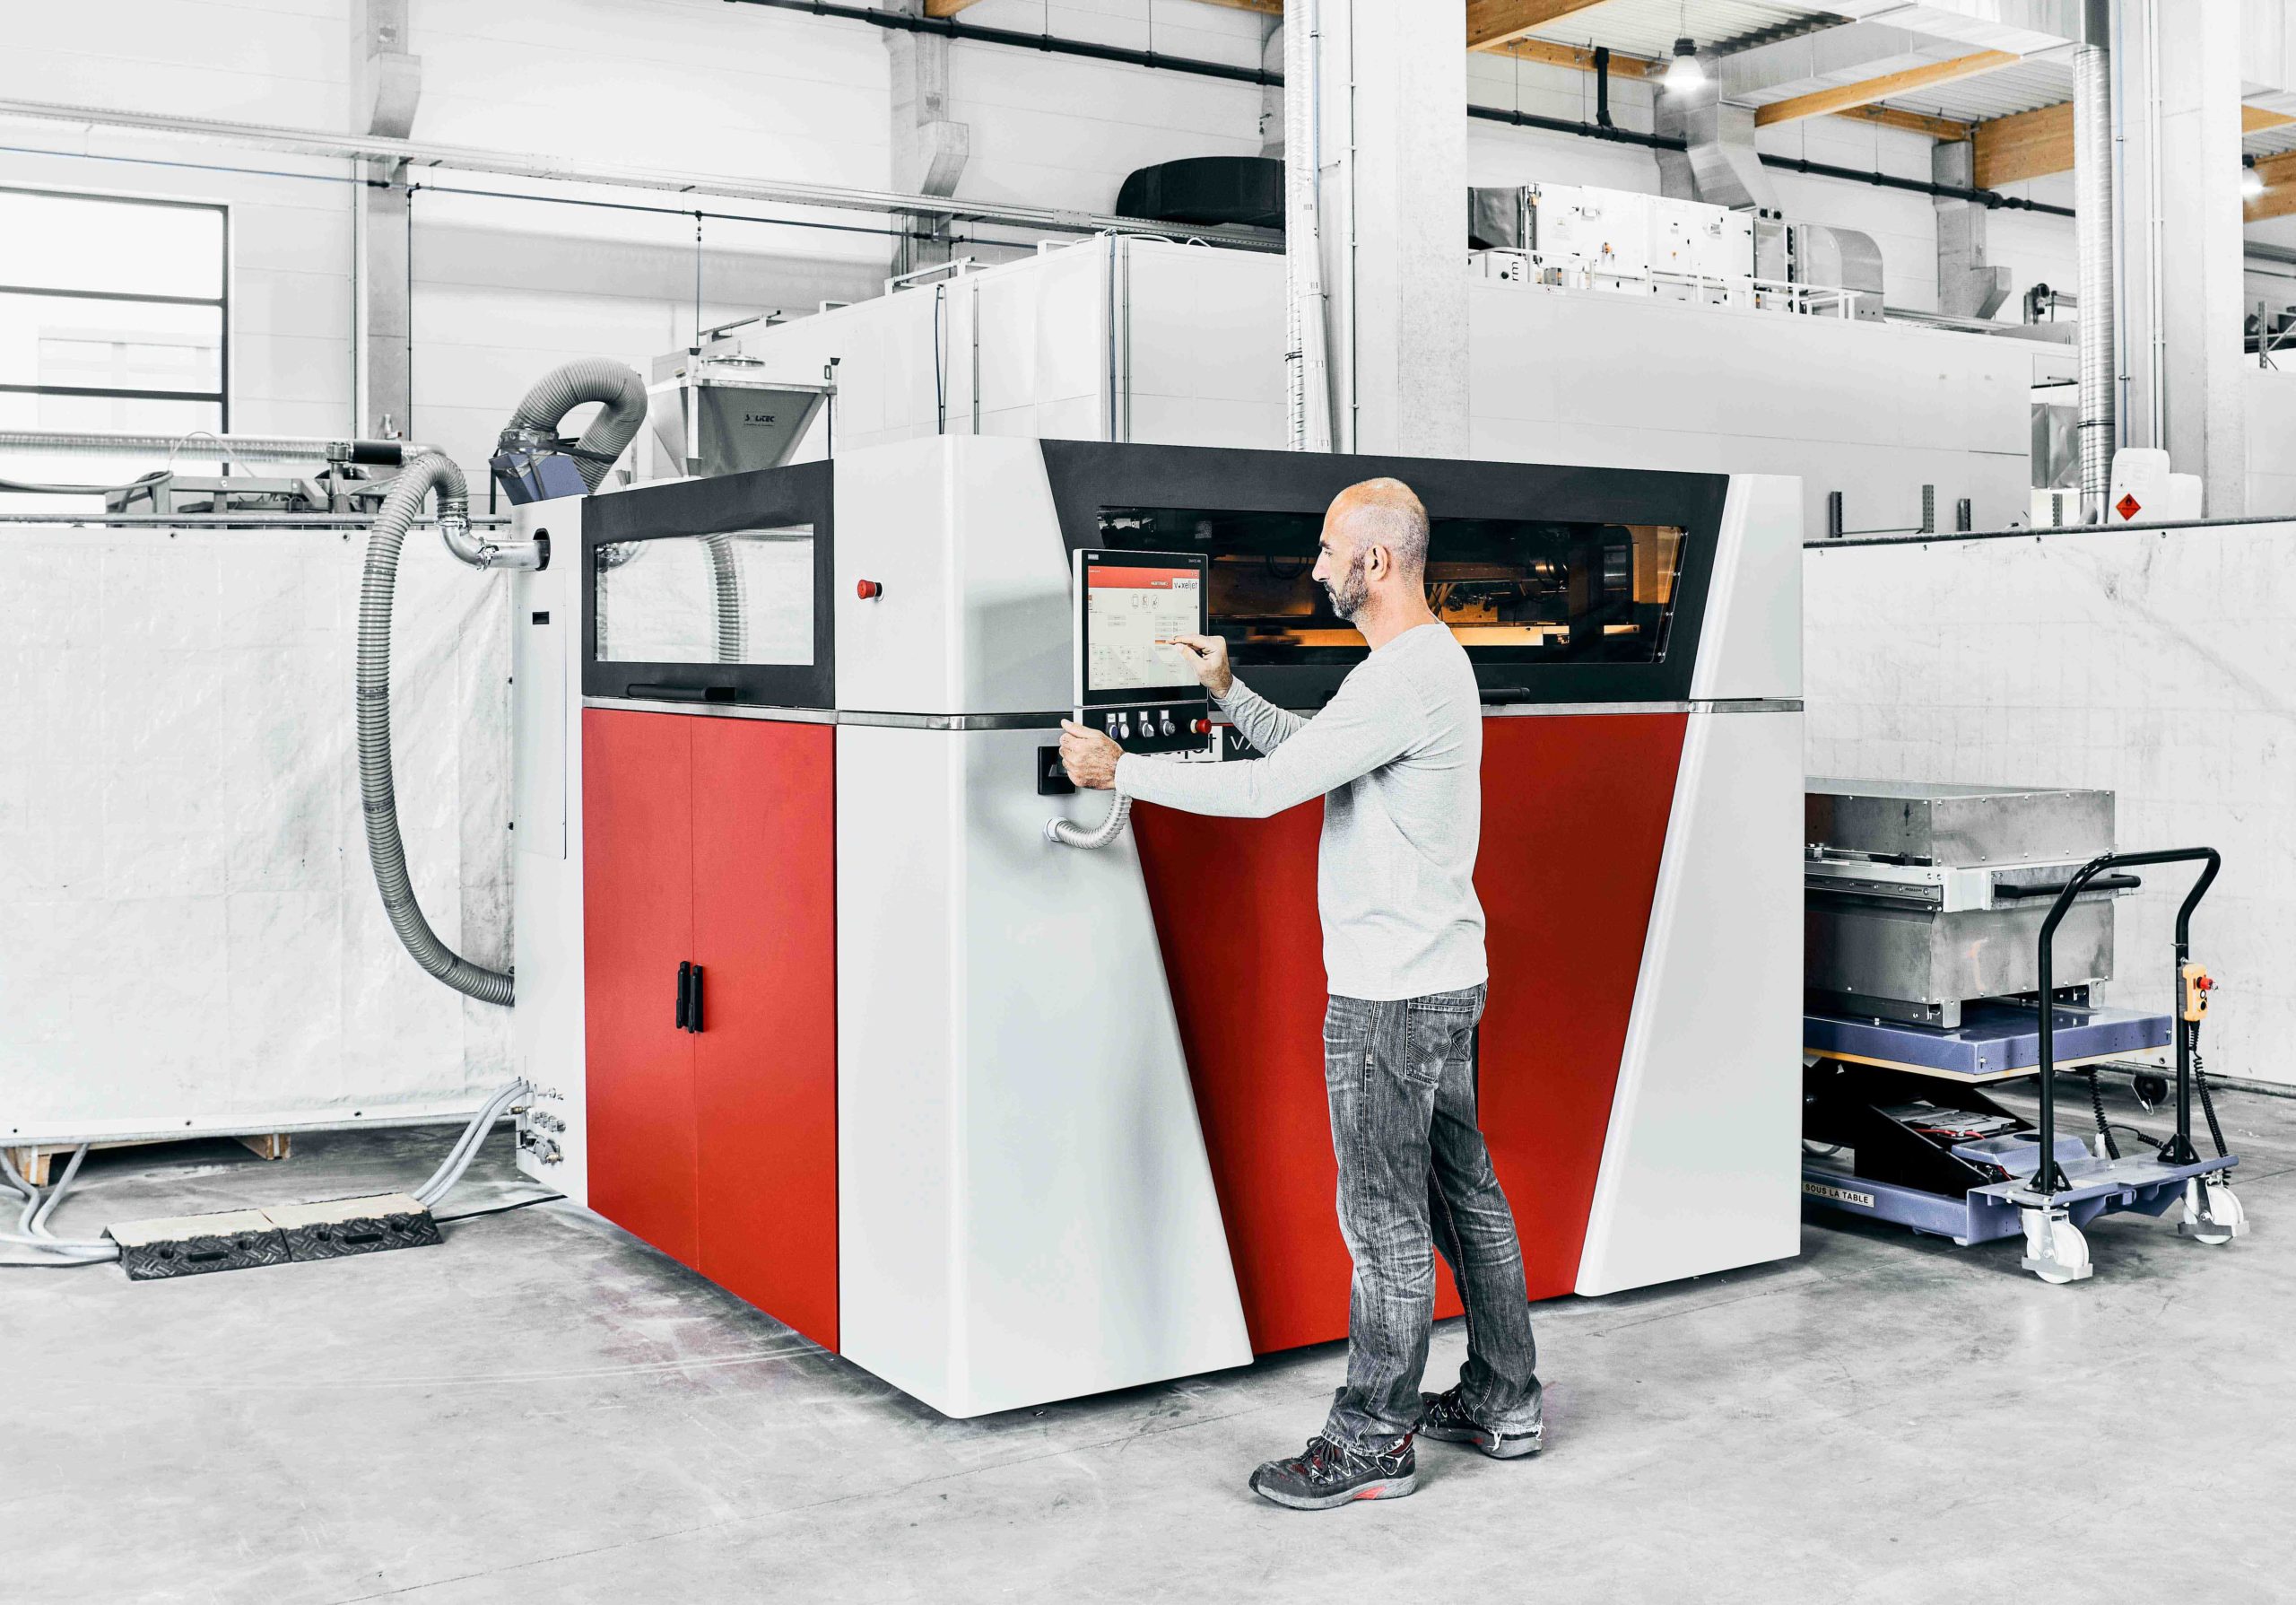 The VX1000 HSS from voxeljet is a high-performance 3D printer for processing polymers